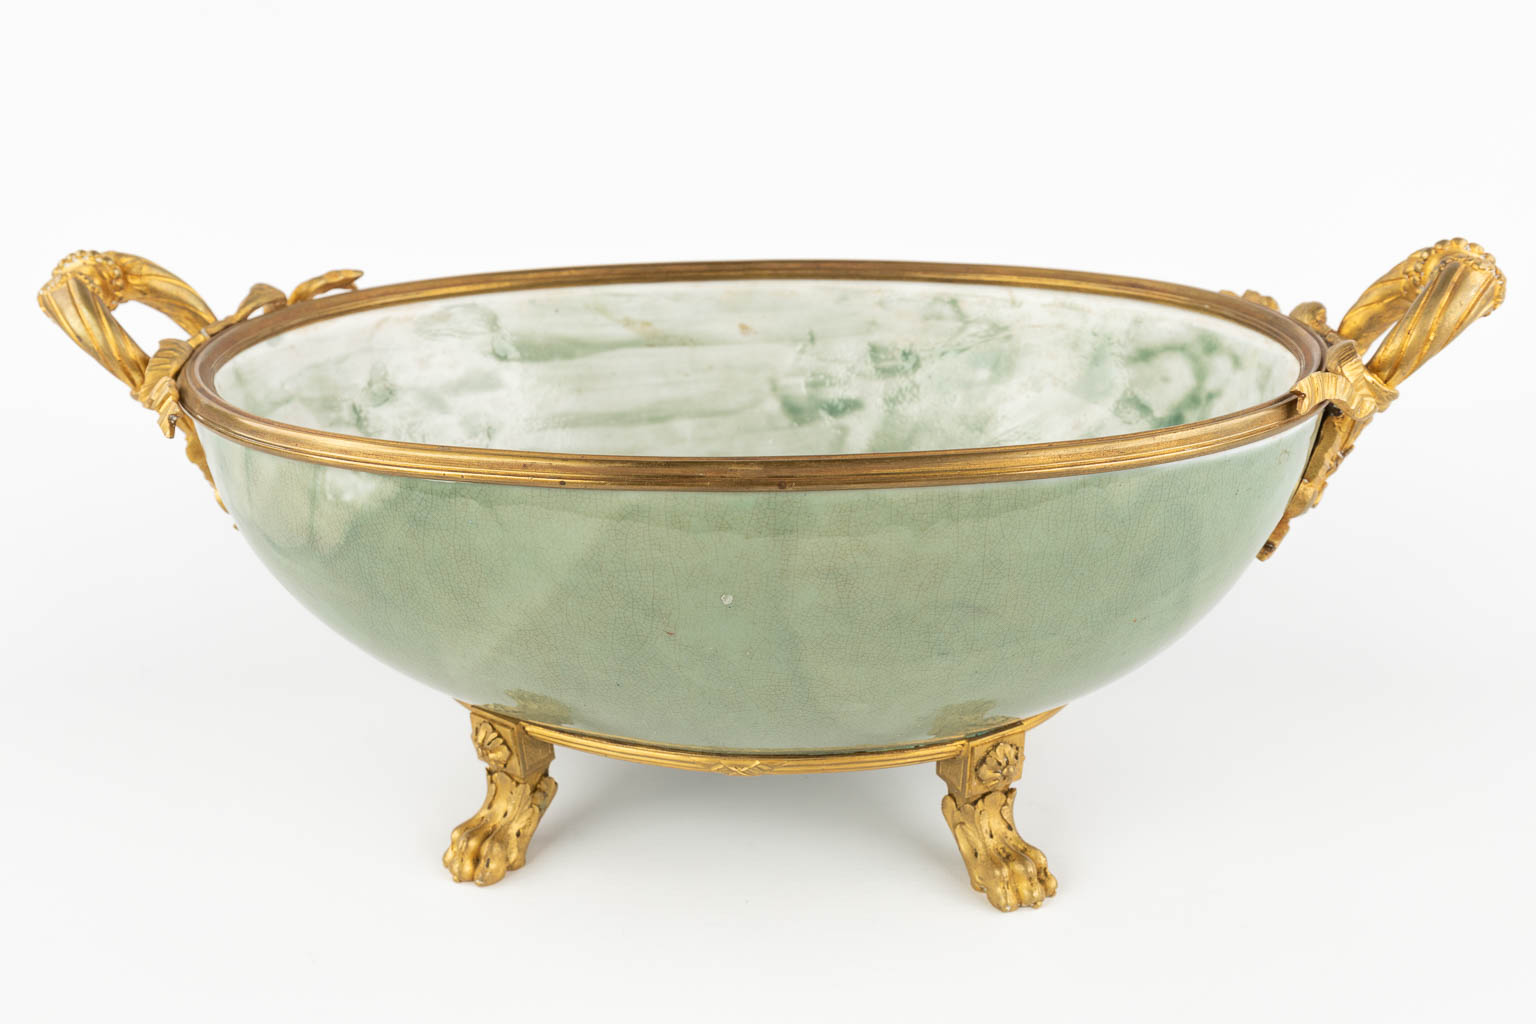 A large bowl mounted with gilt bronze. Glazed stoneware. (D:26 x W:47 x H:20 cm)